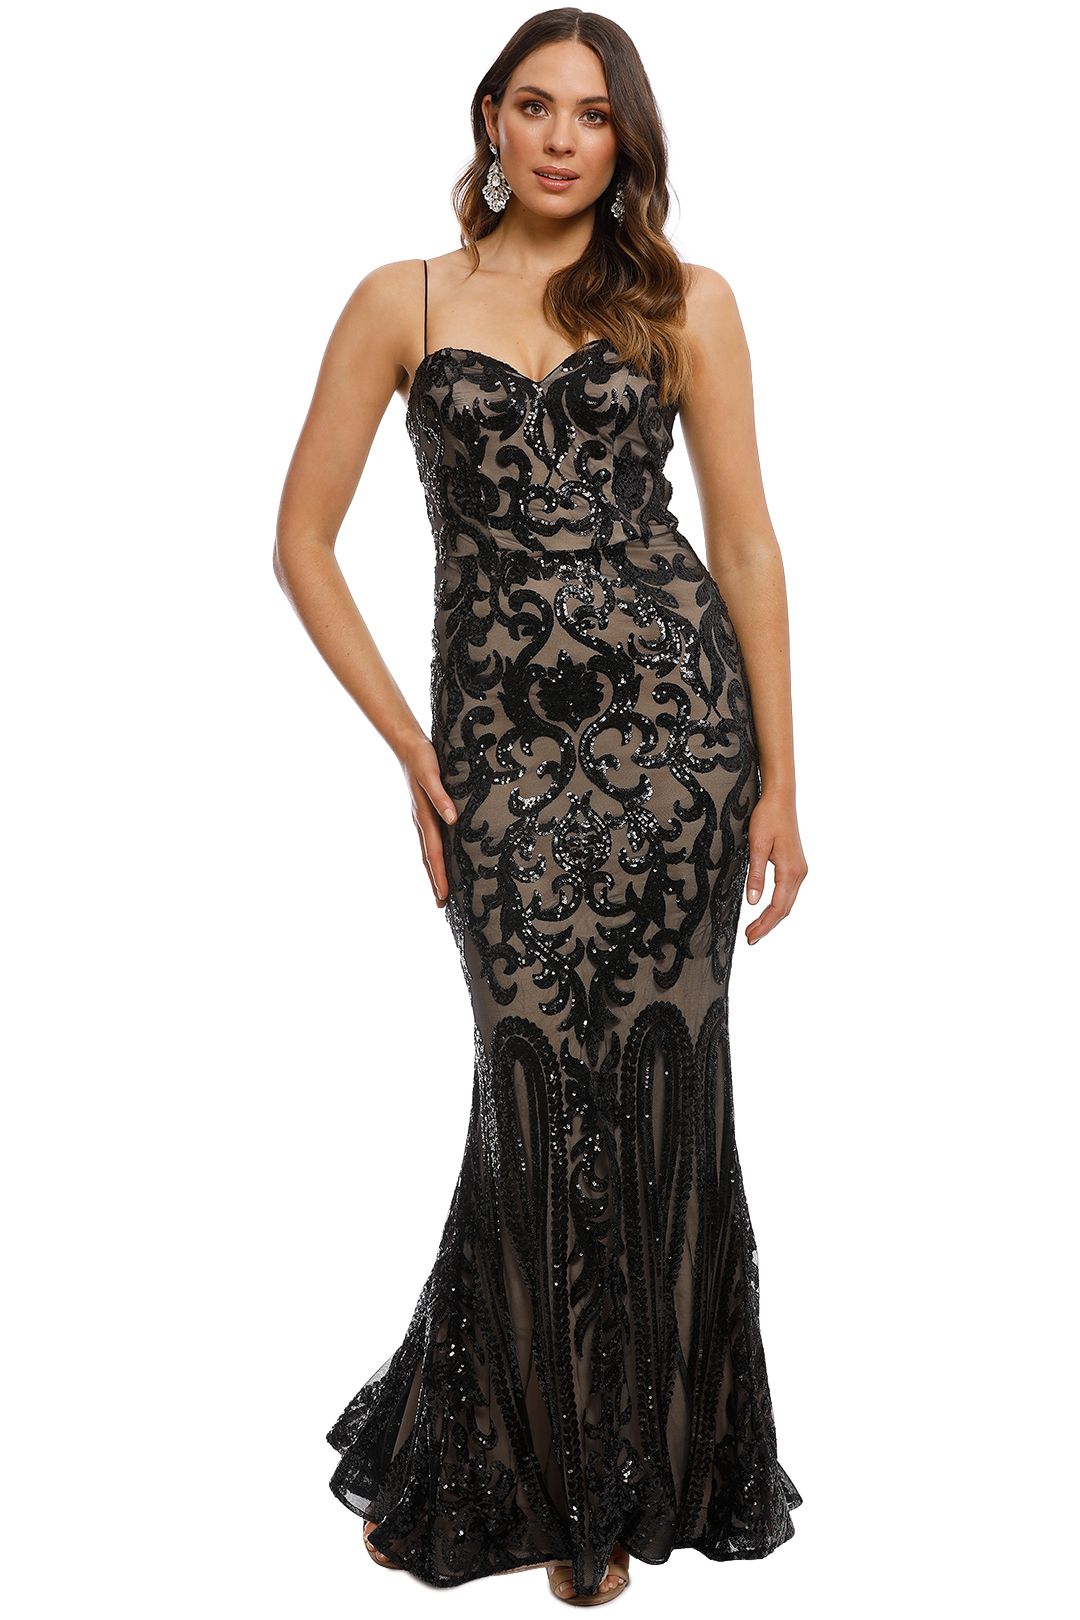 Tinaholy - Odessa Sequin Gown - Black - Front